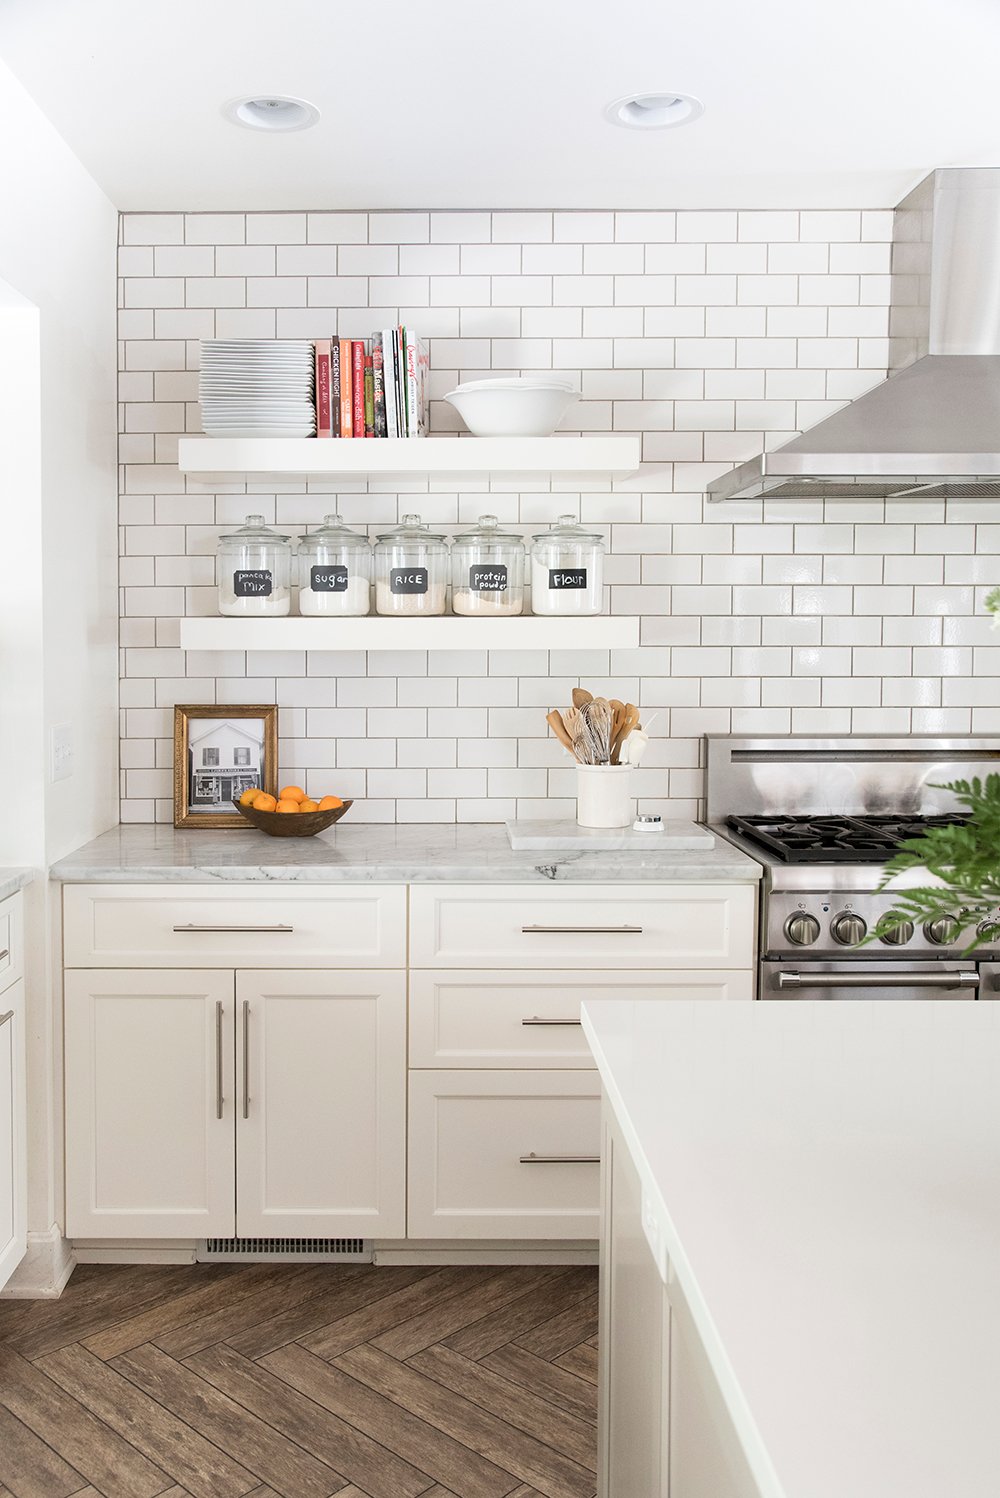 How to Incorporate Floating Shelves in Your Kitchen - Room for Tuesday